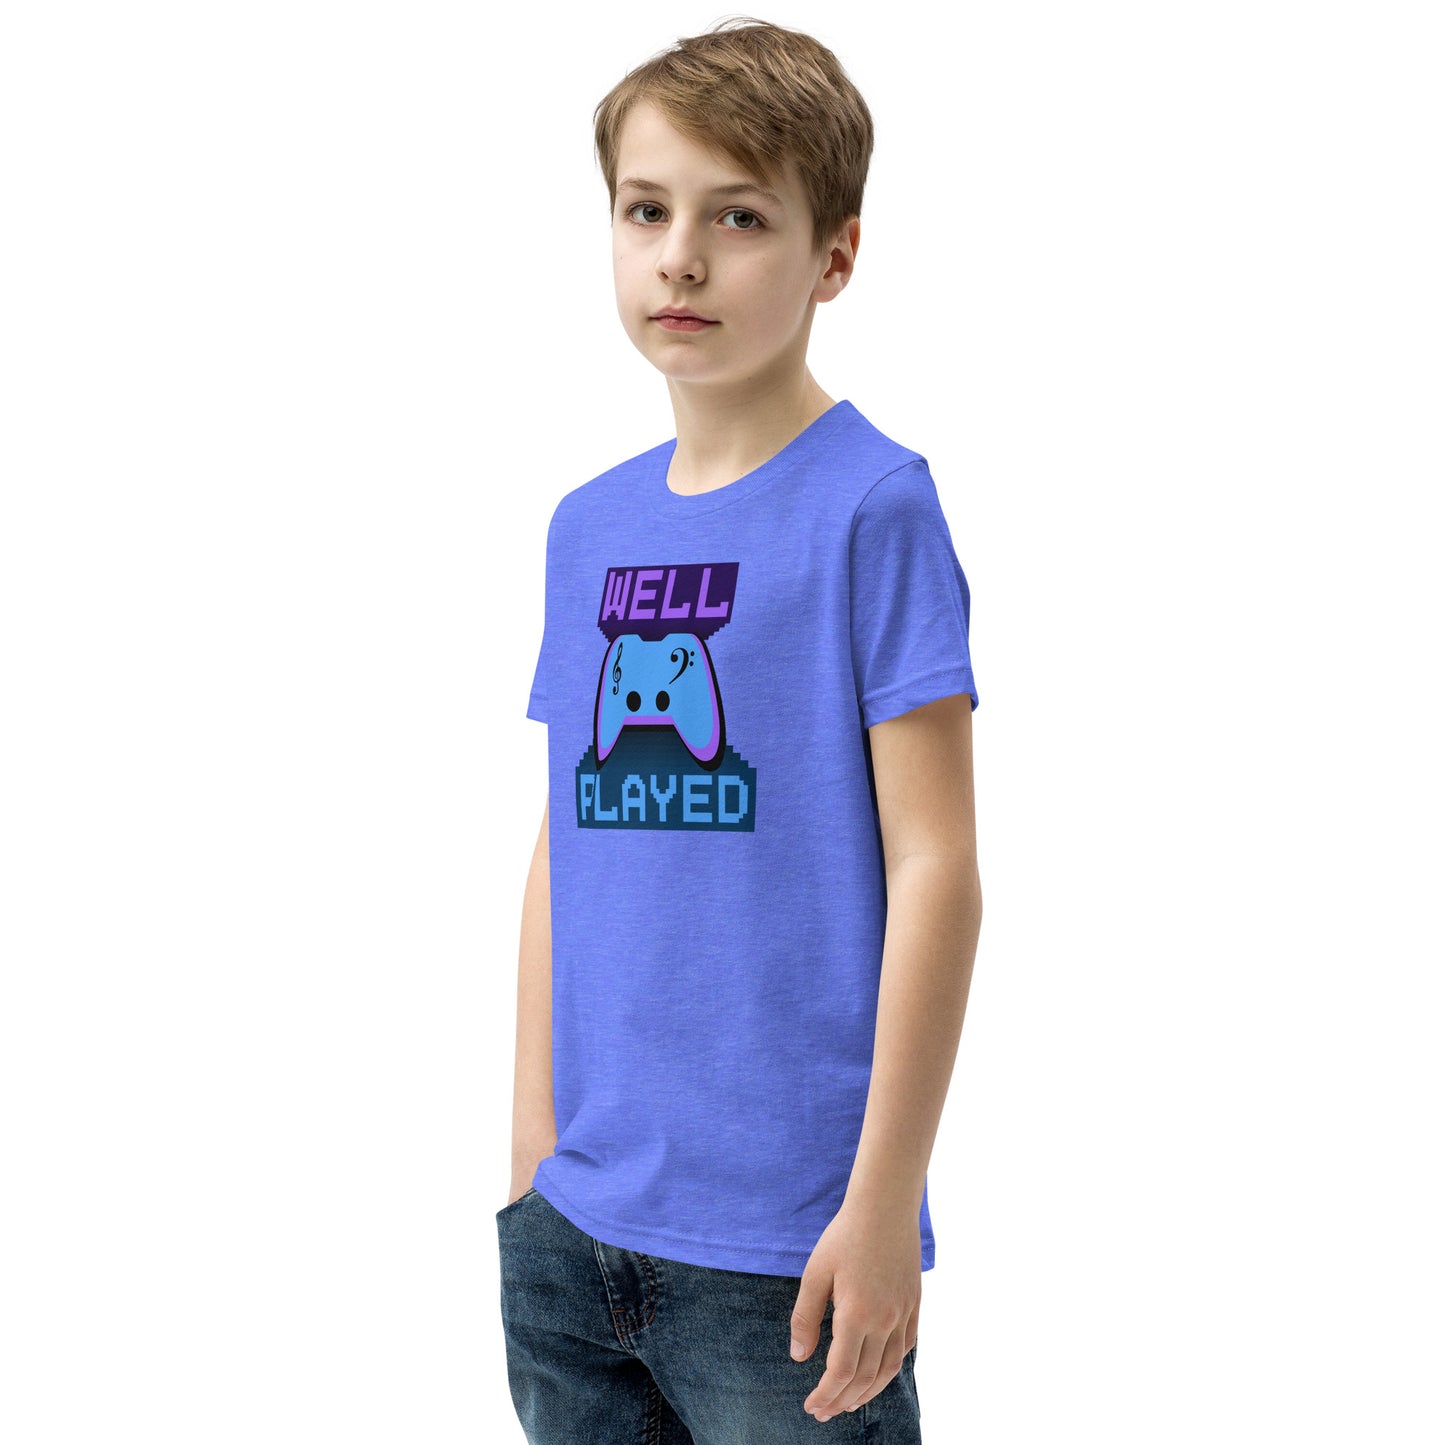 Well Played Printed Youth Short Sleeve T-Shirt